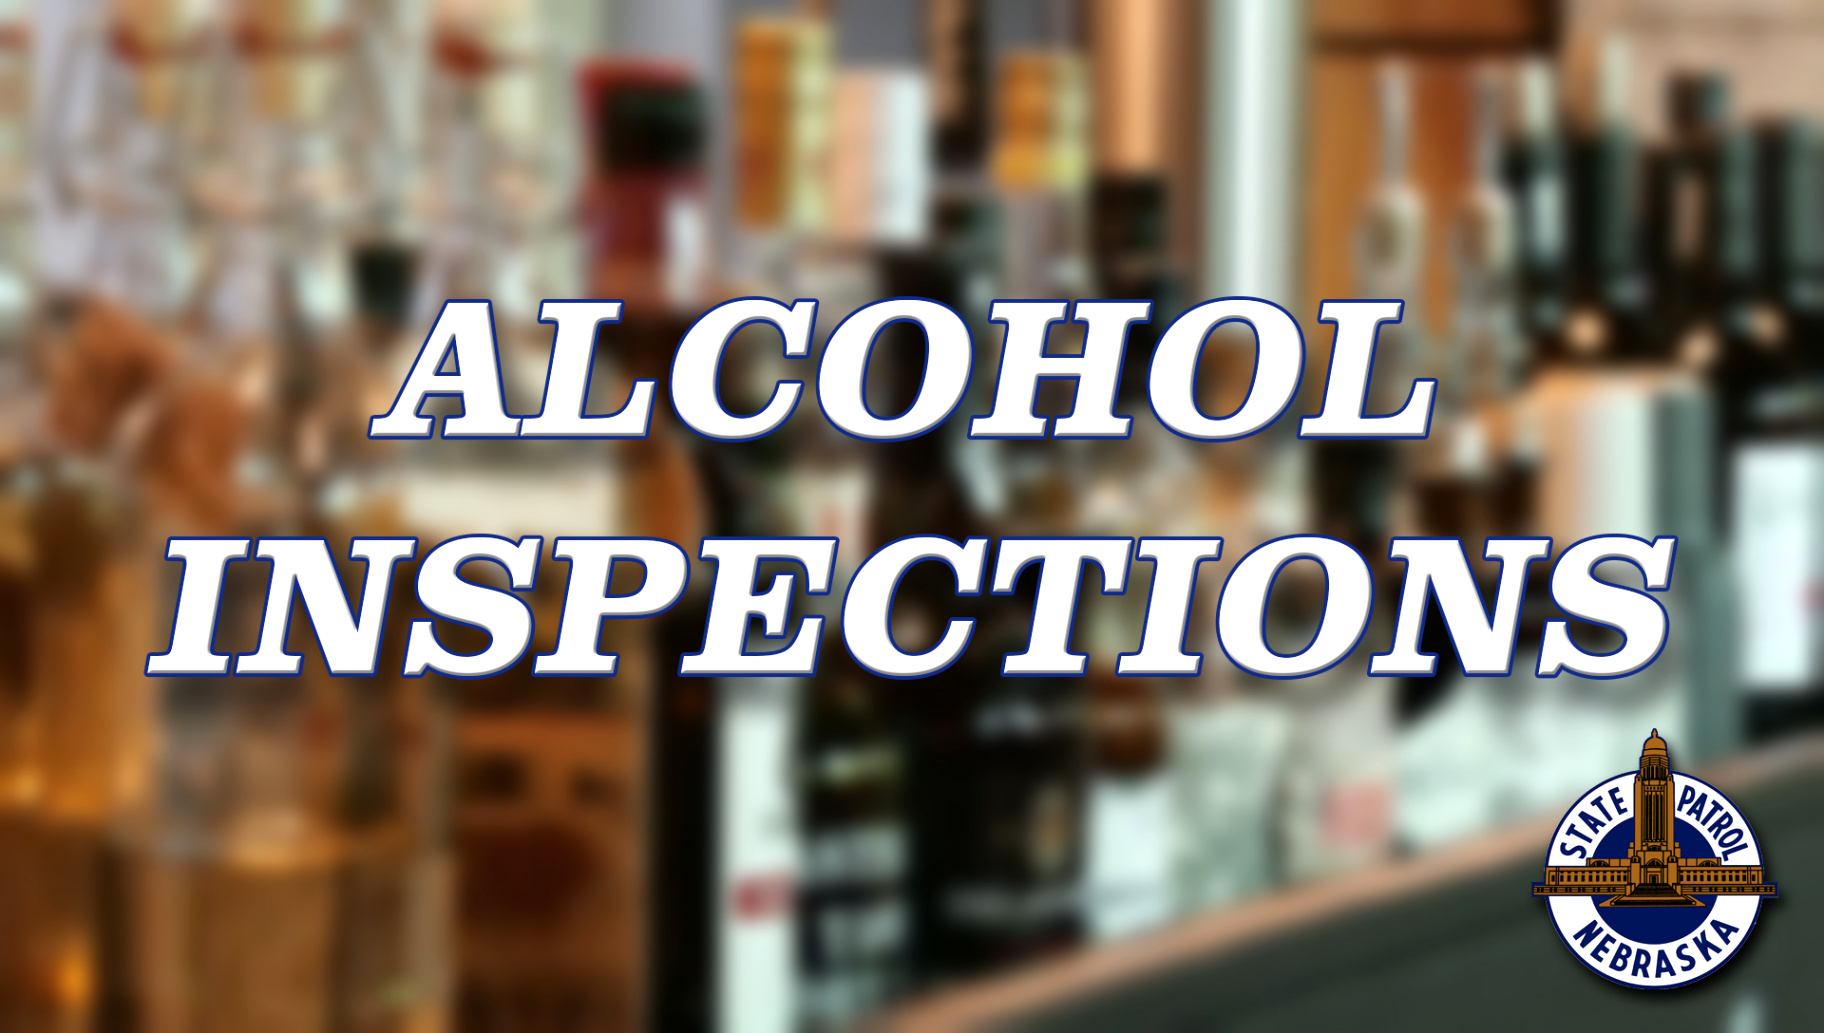 Red Willow Ne Car Accident Lawyer Dans Alcohol Inspections Conducted In Red Willow County Nebraska ...